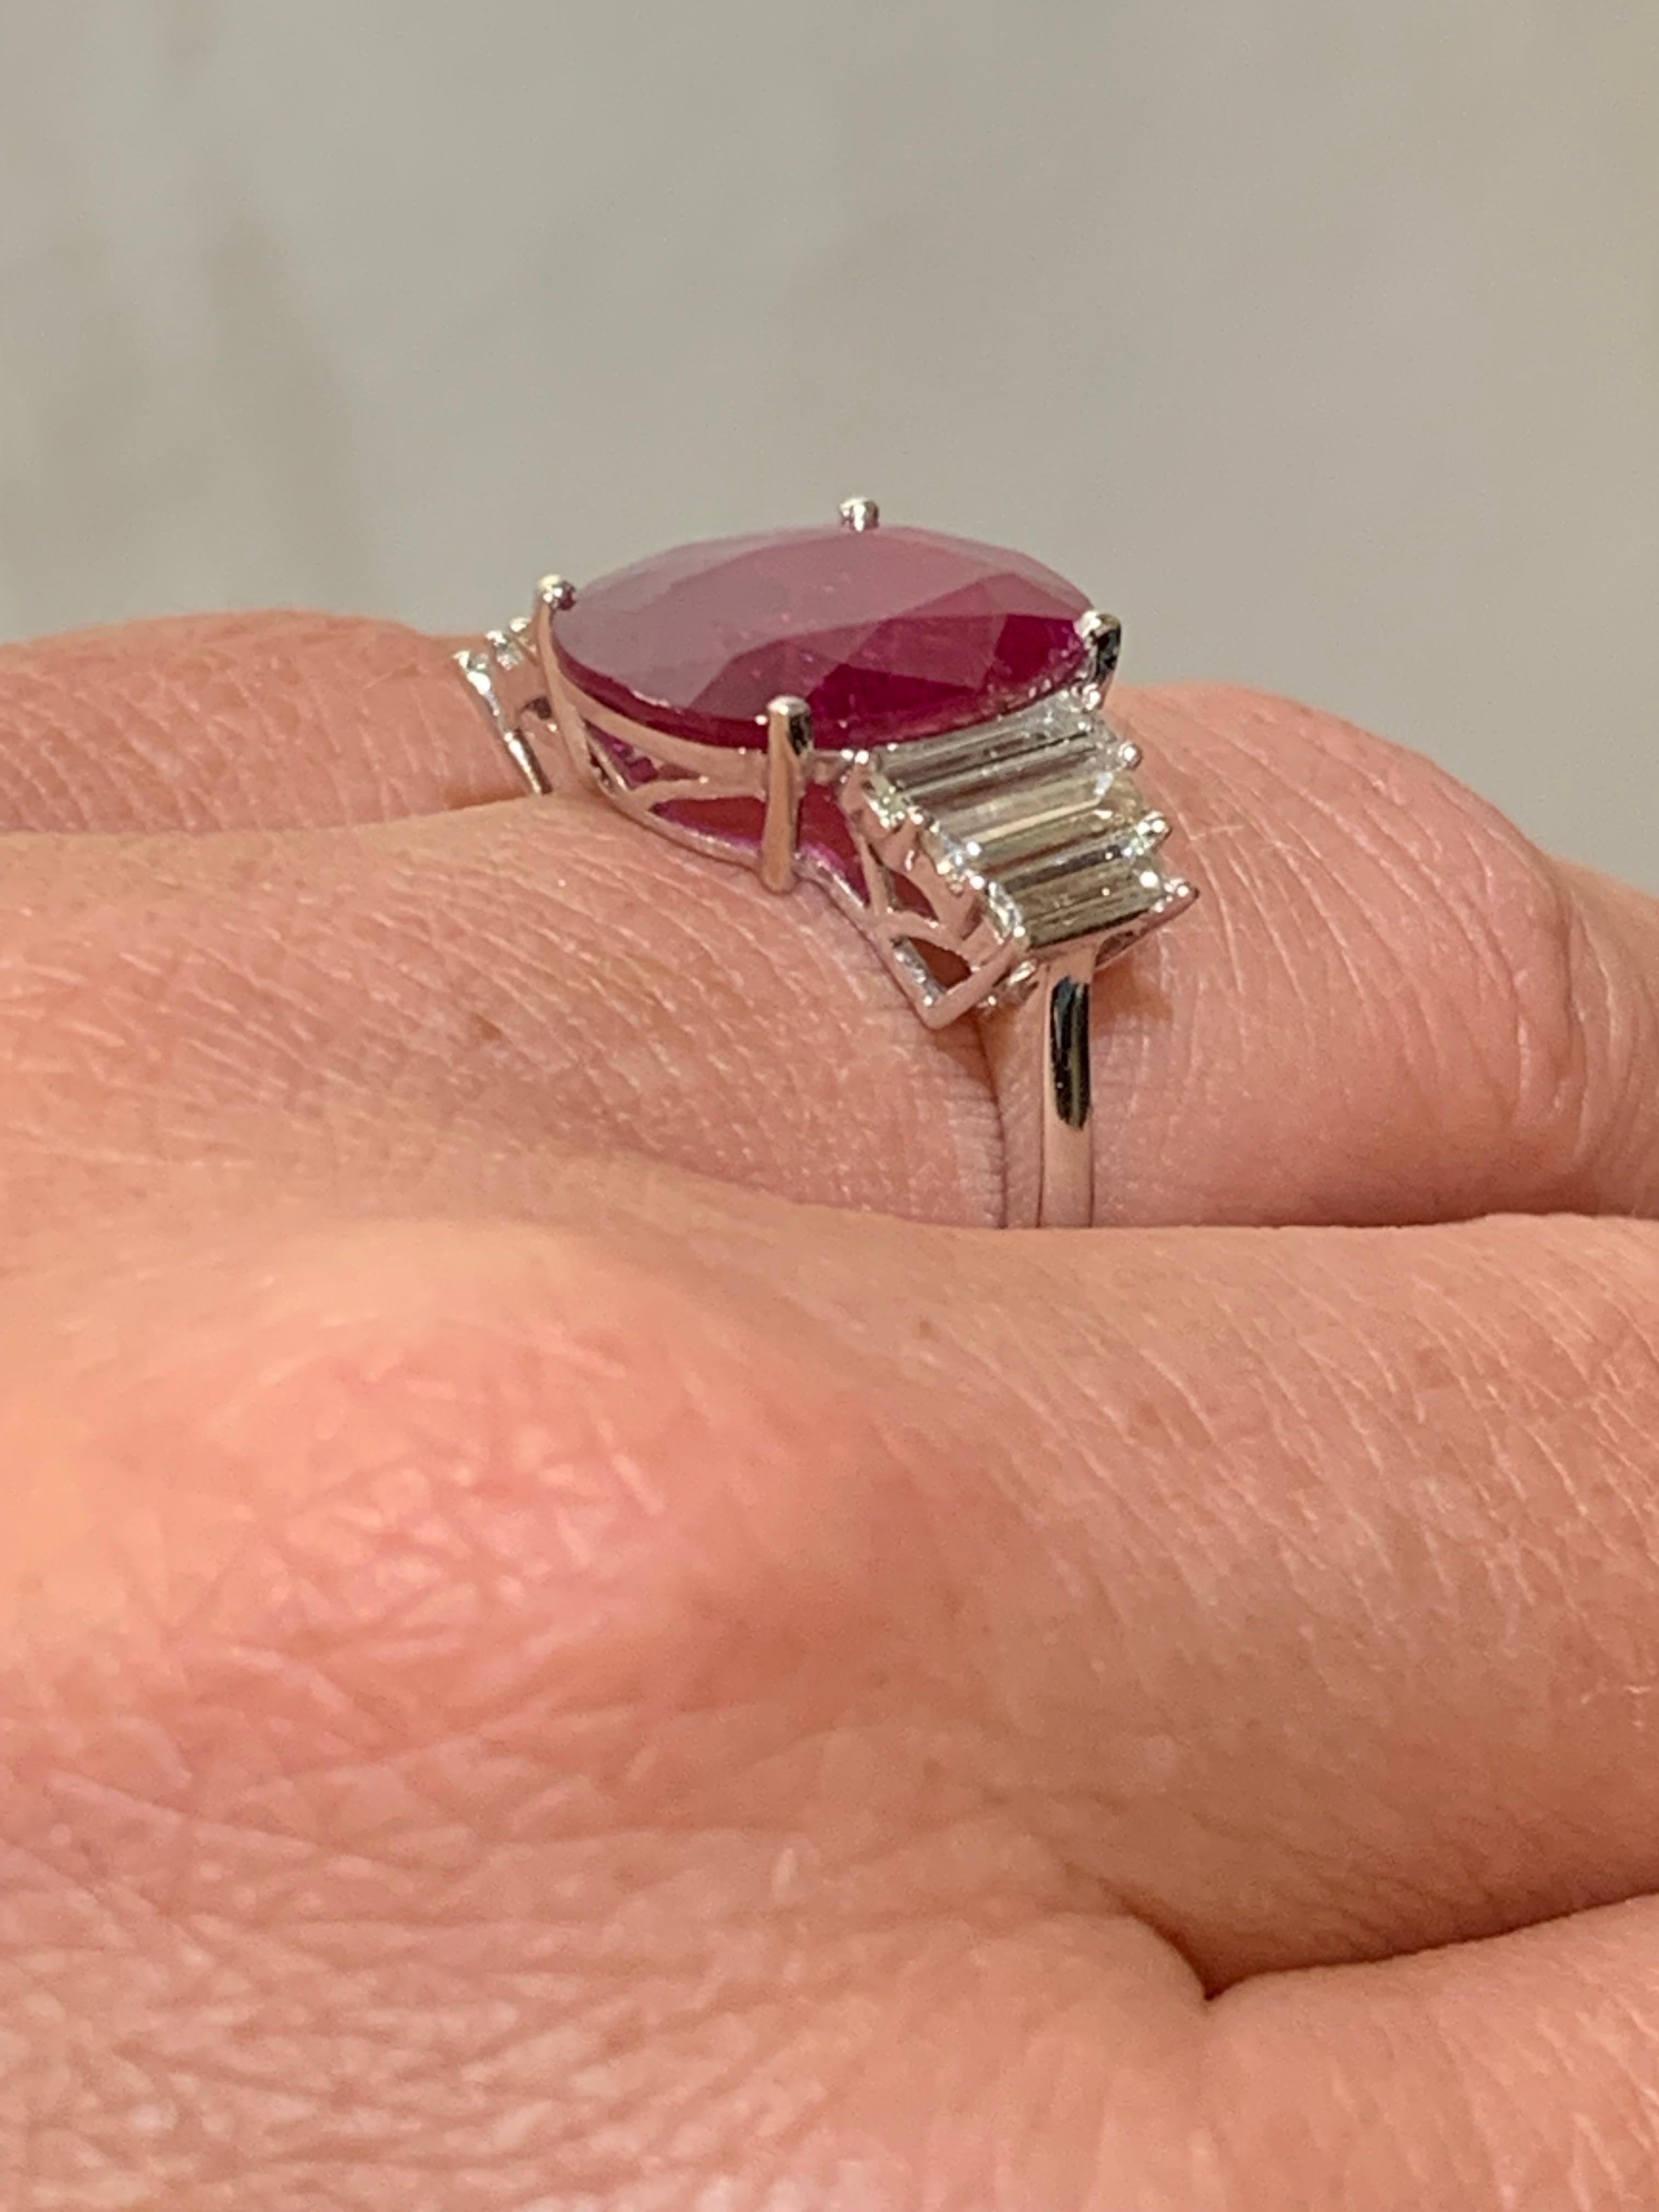 Women's Ring Set with a Ruby Surrounded by Baguette Cut Diamonds